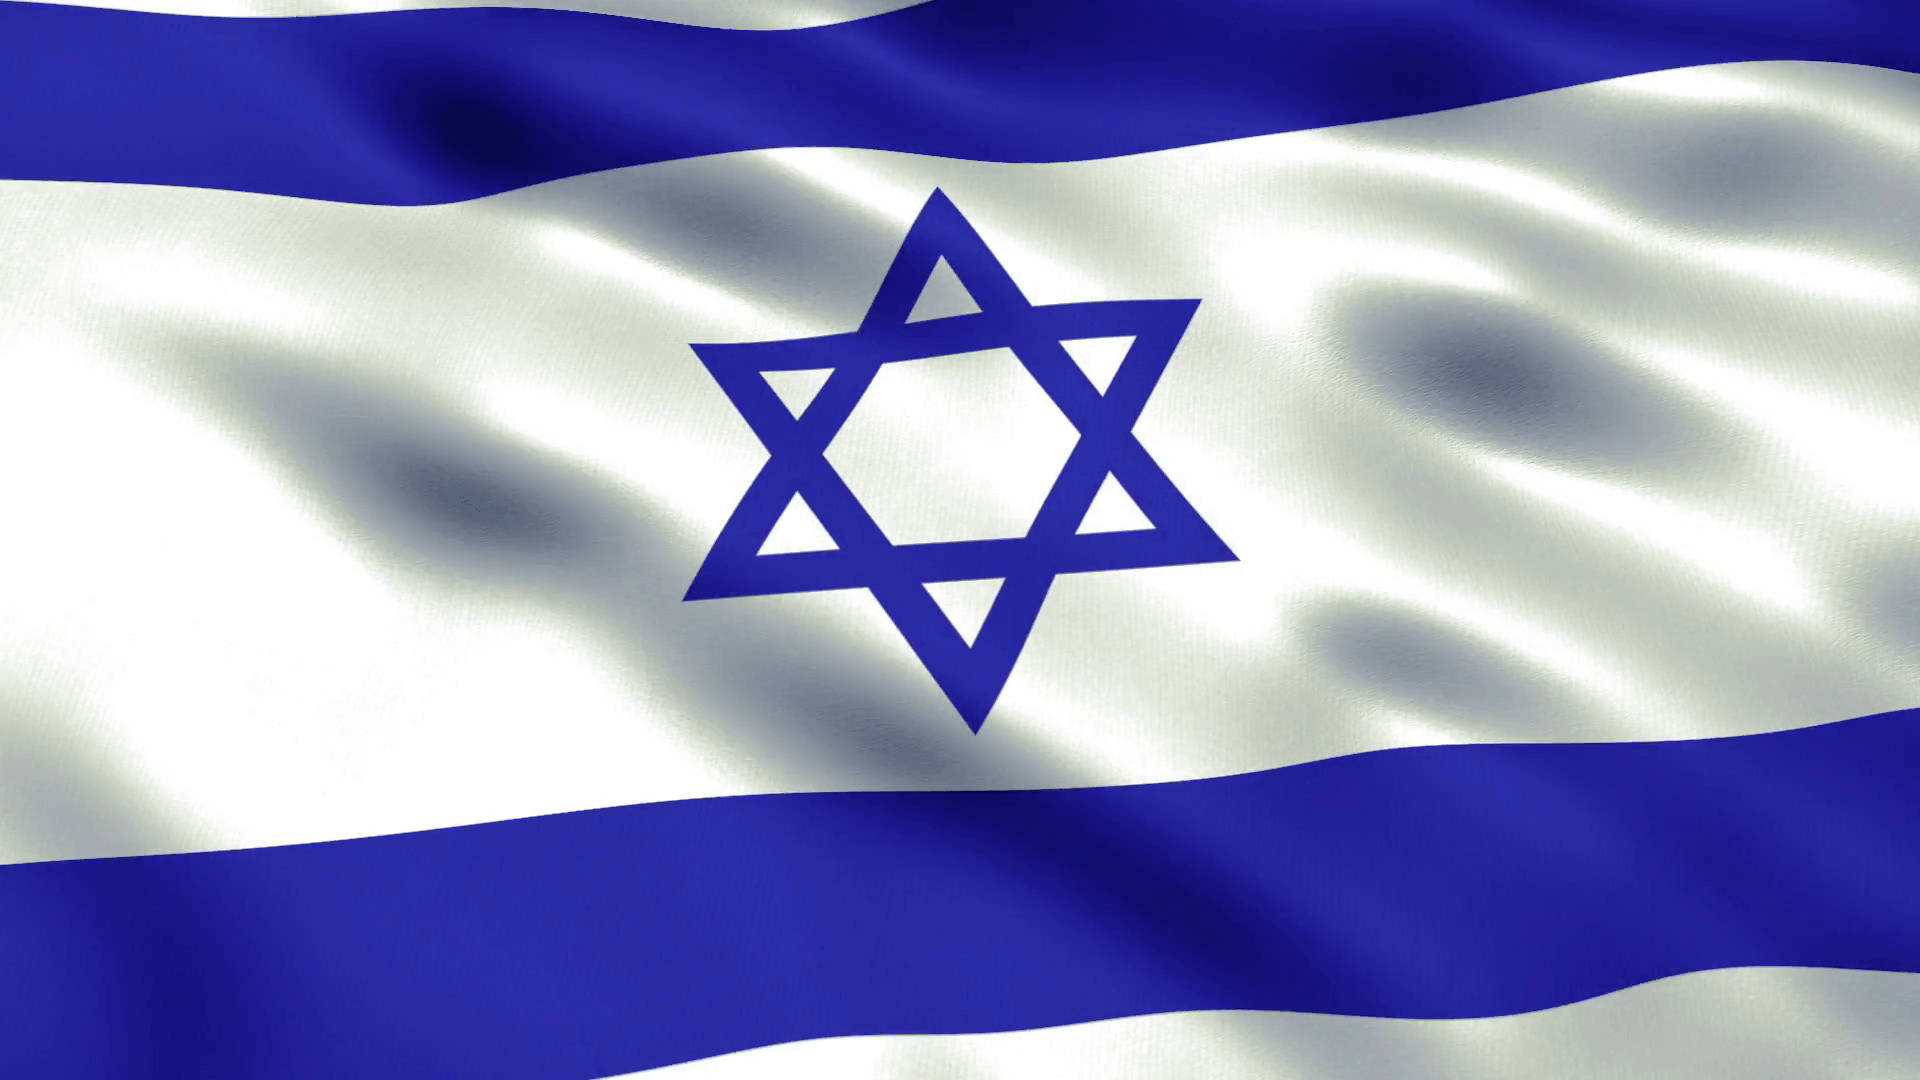 Israel Flag With Satin Texture Wallpaper